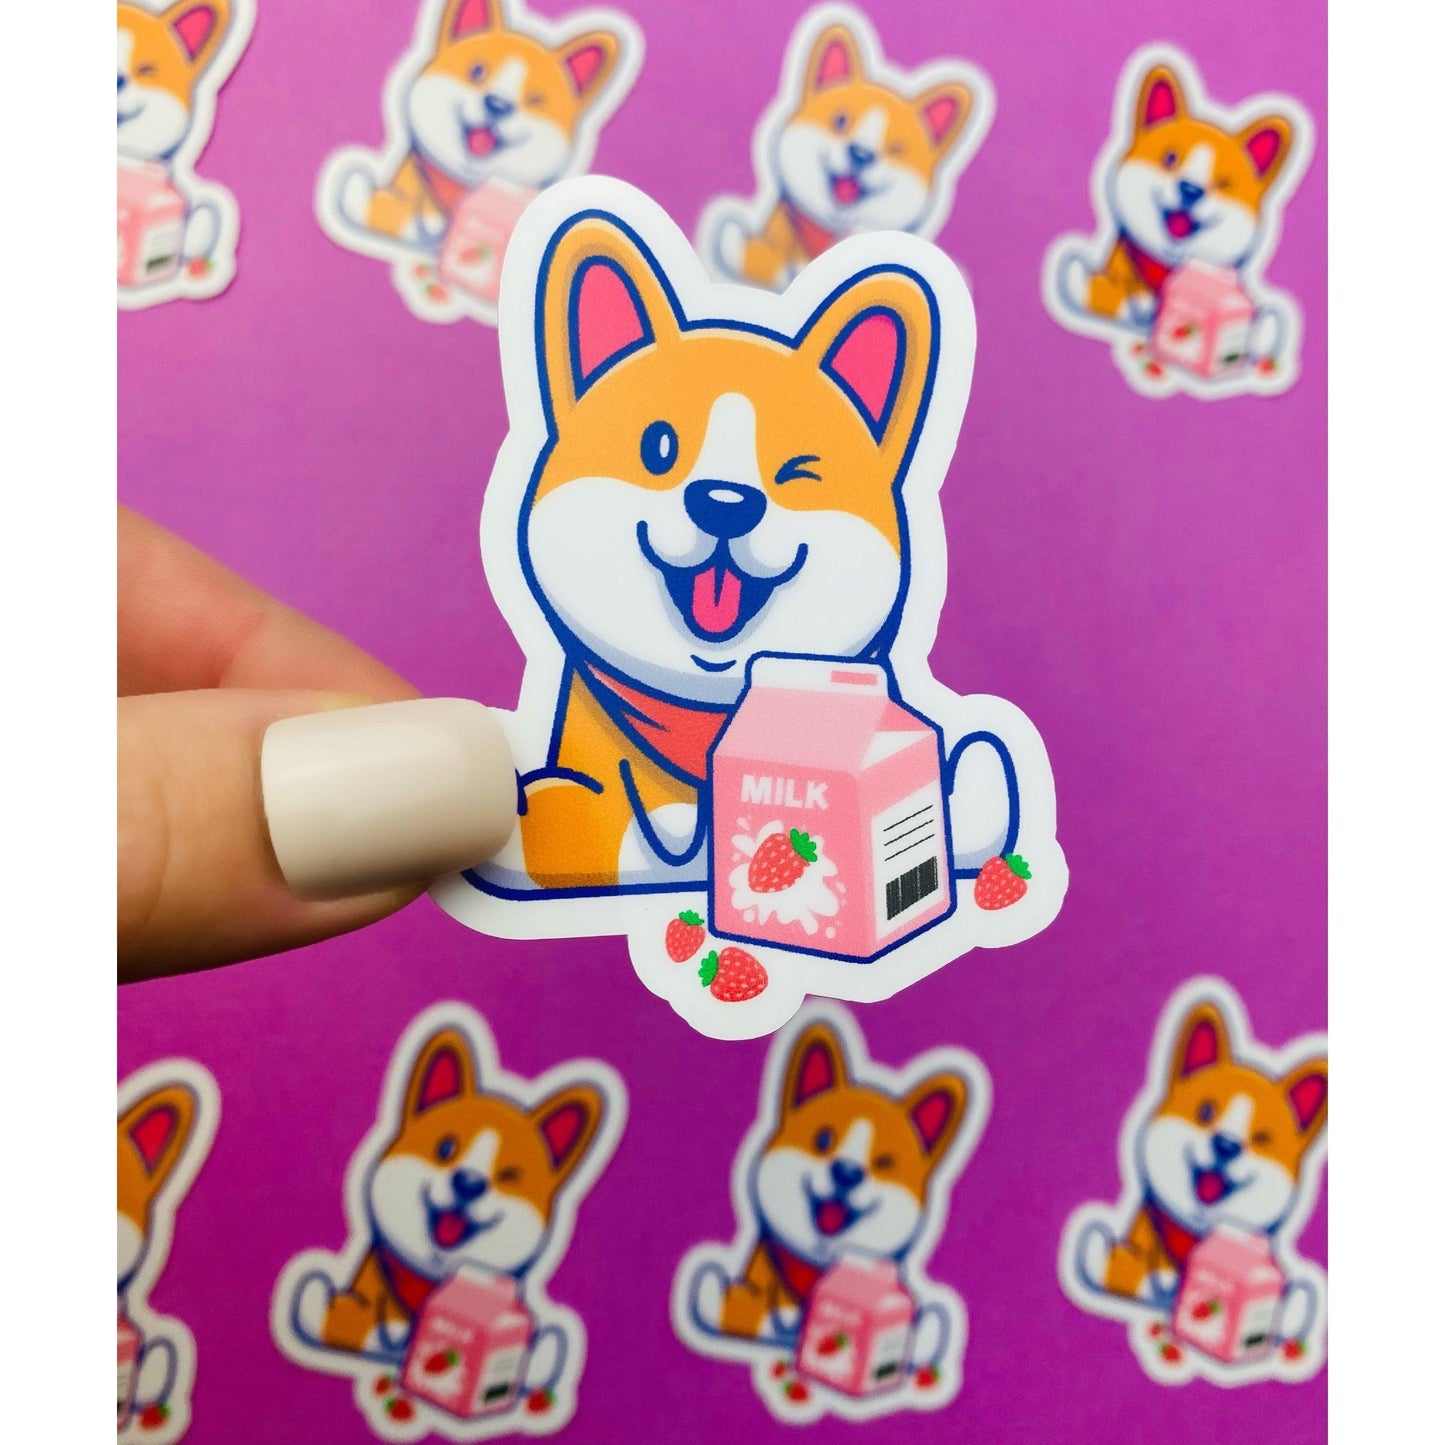 Corgie Strawberry Milk Sticker - Kawaii Cute Corgi Dog with Berry Delicious Strawberries and Milk Adorable Sticker for Teens, Women, Girls - Ottos Grotto :: Stickers For Your Stuff